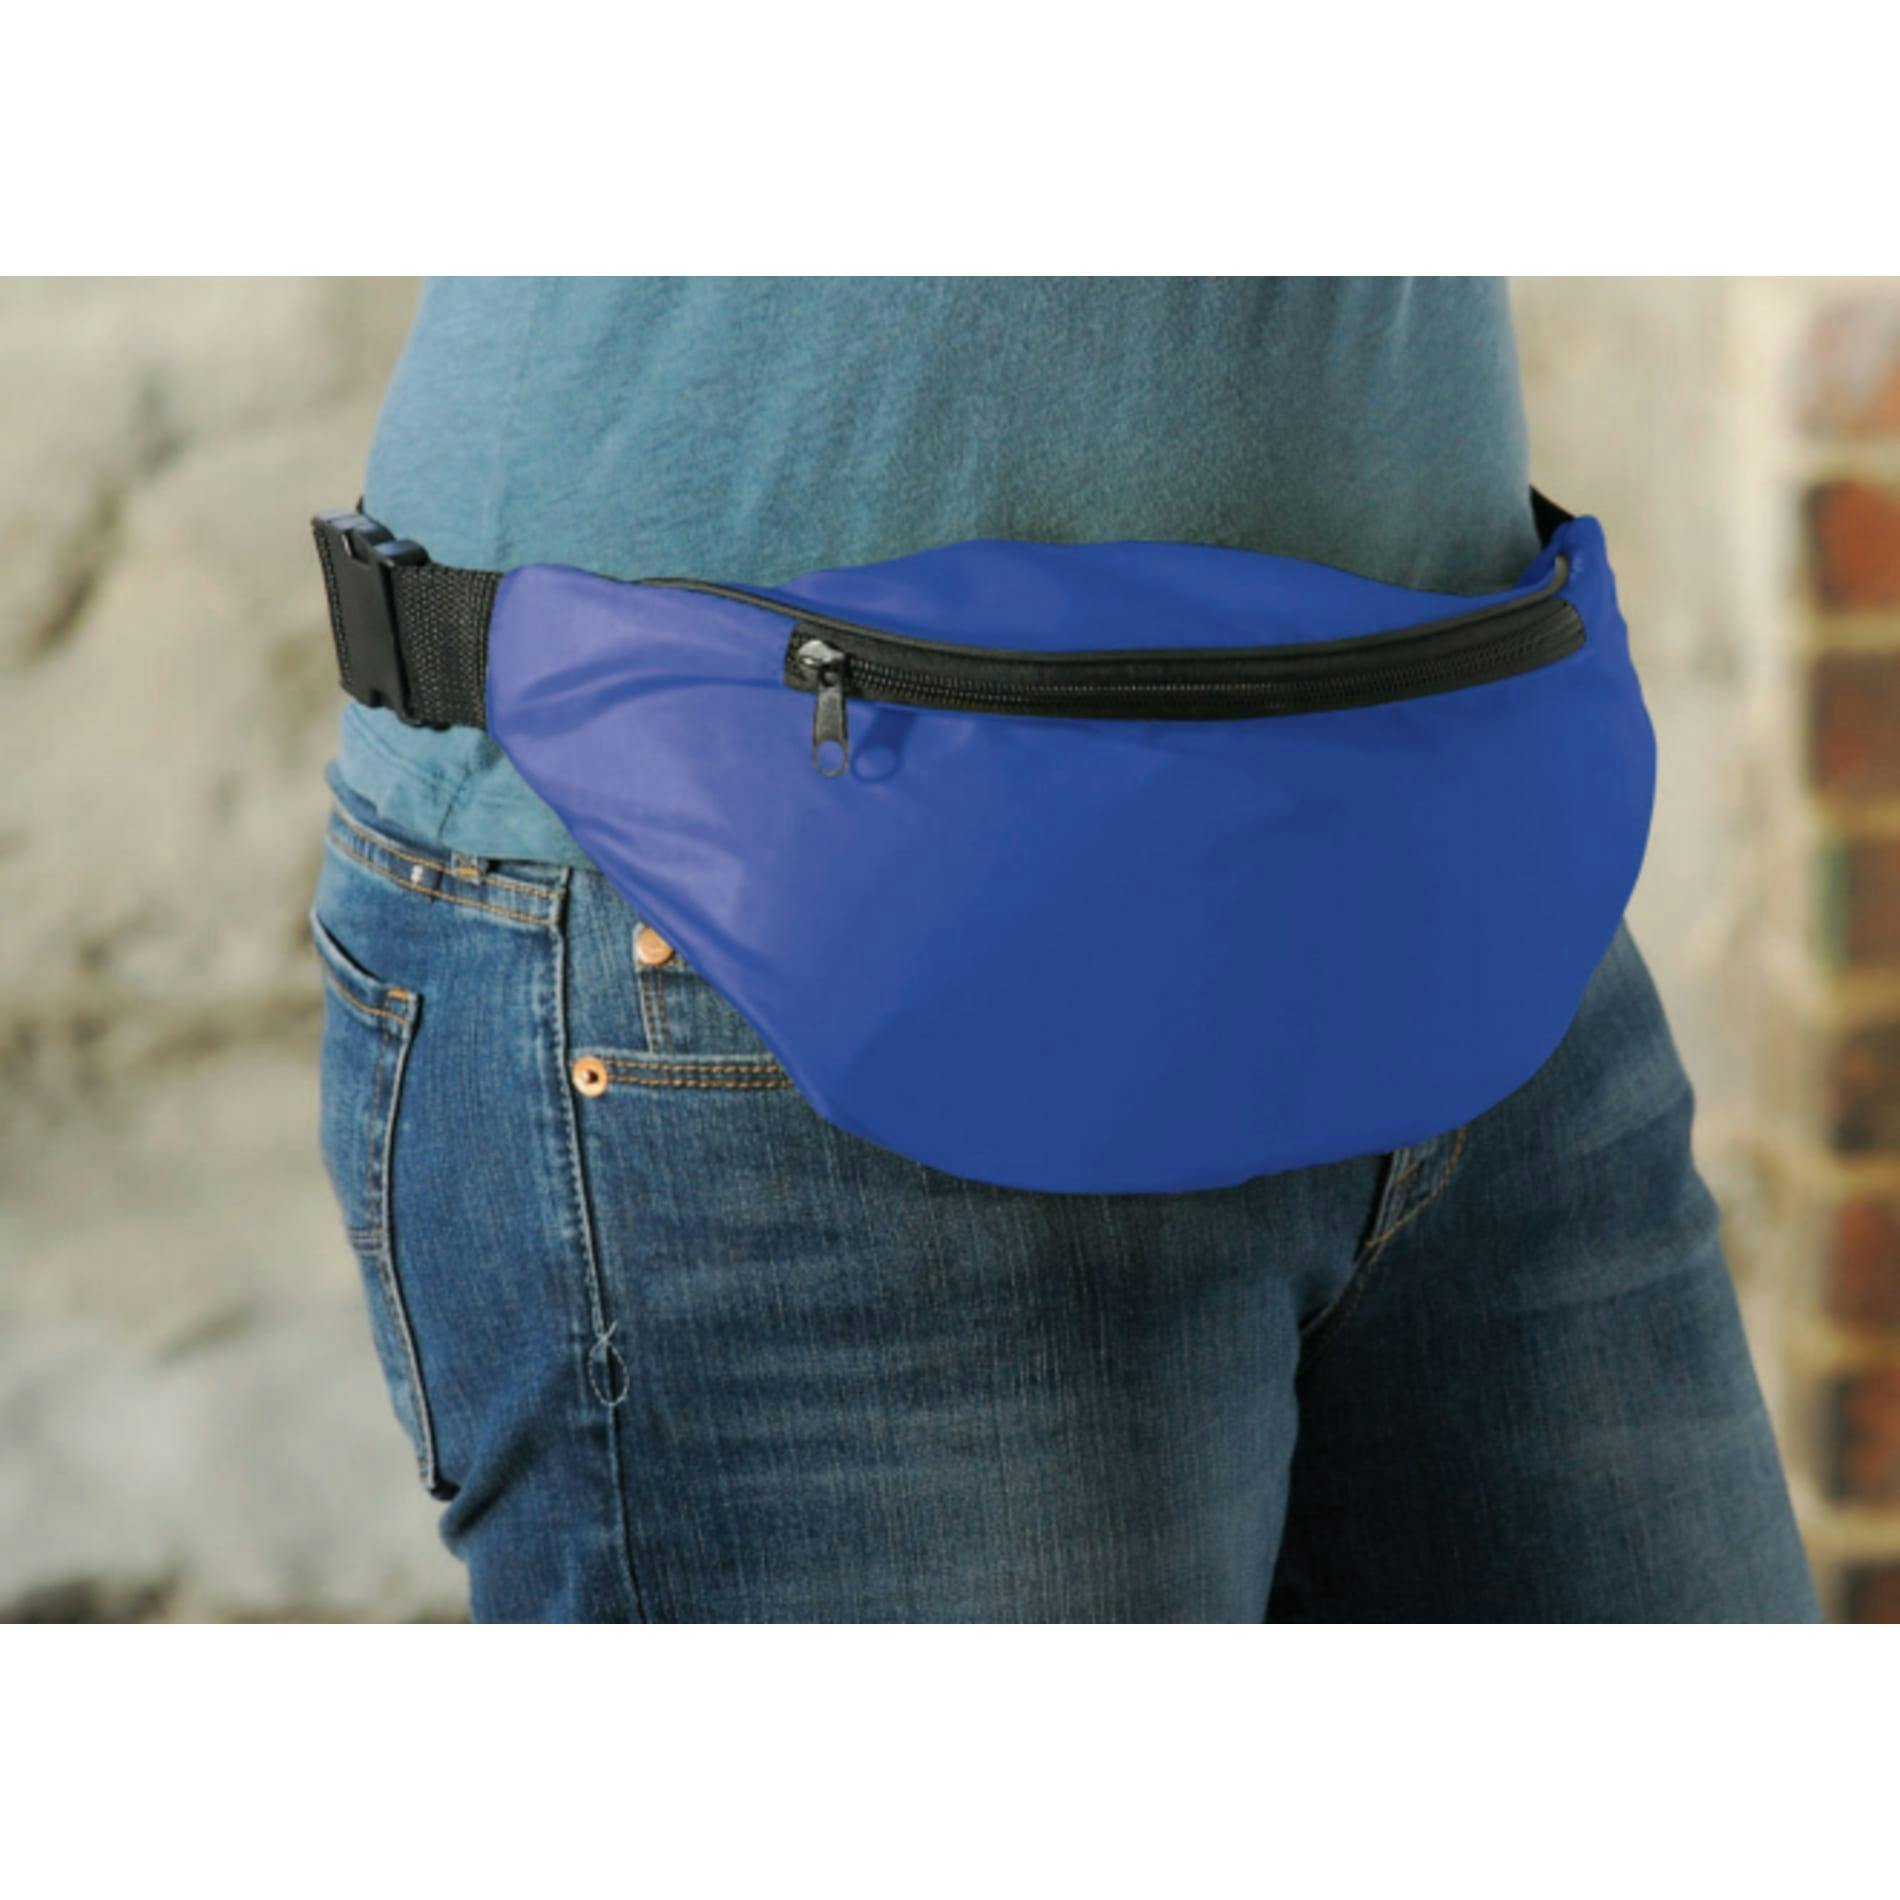 Hipster Budget Fanny Pack - additional Image 3